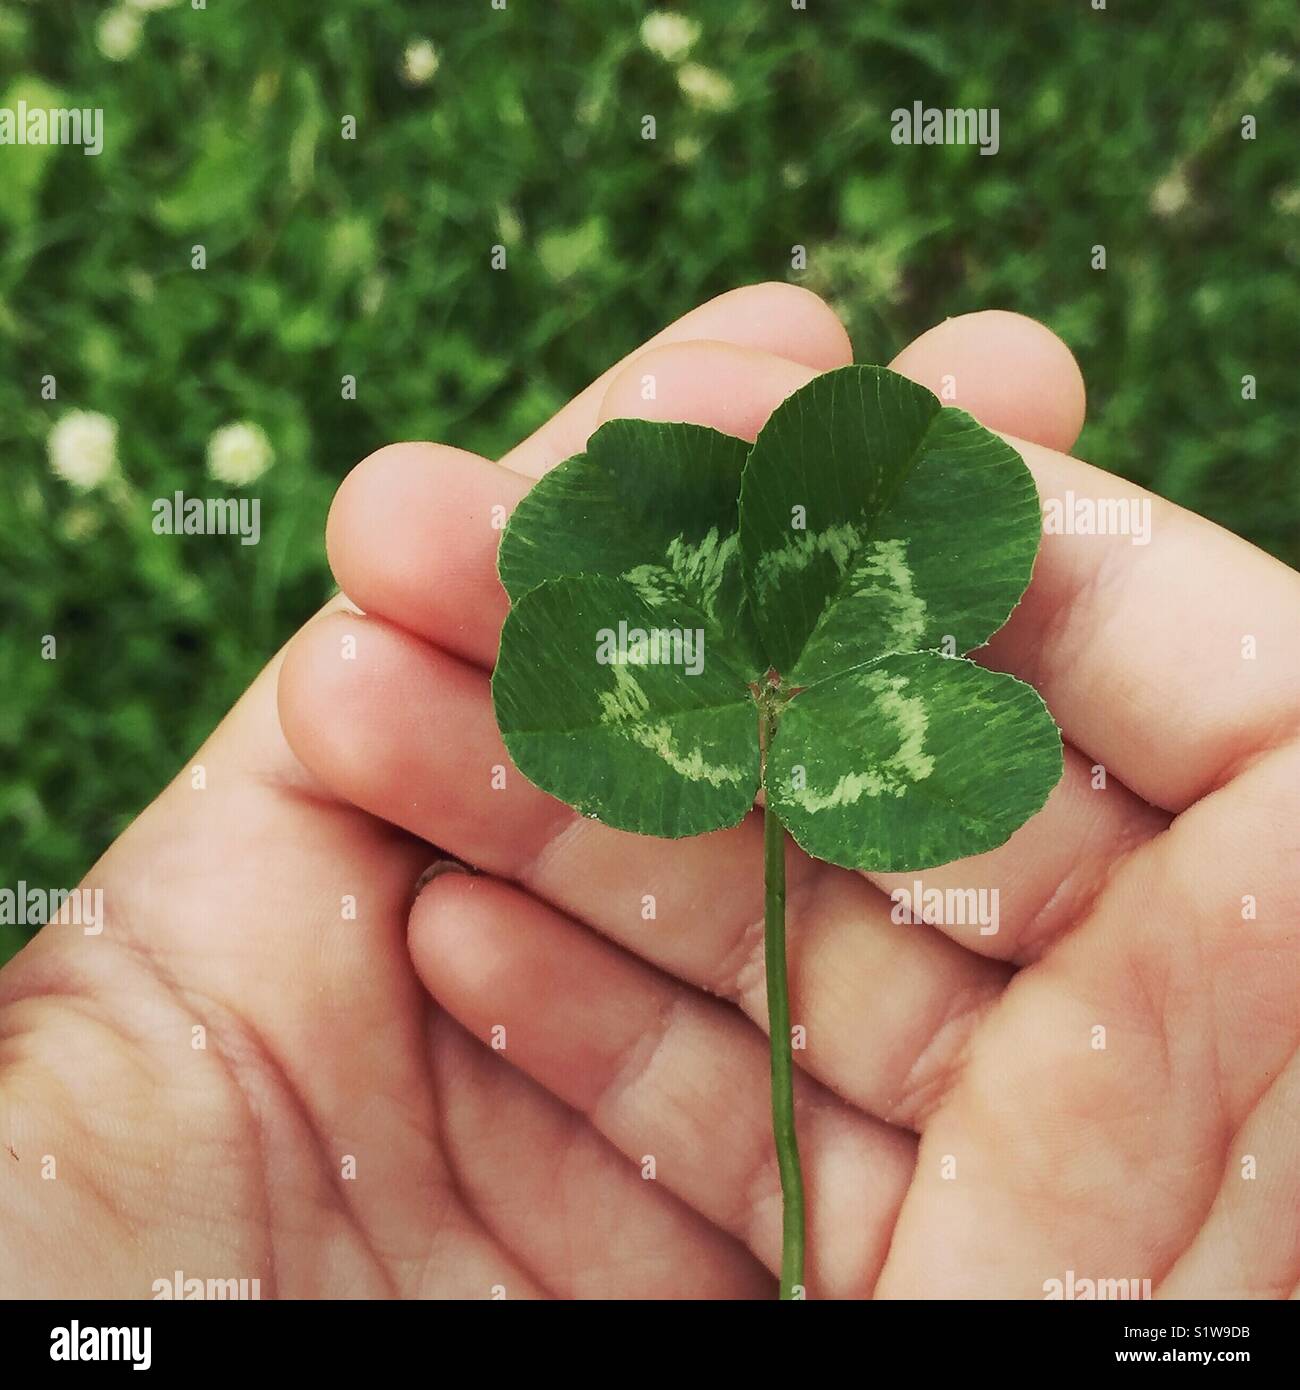 Child’s hands holding a four-leaf clover Stock Photo